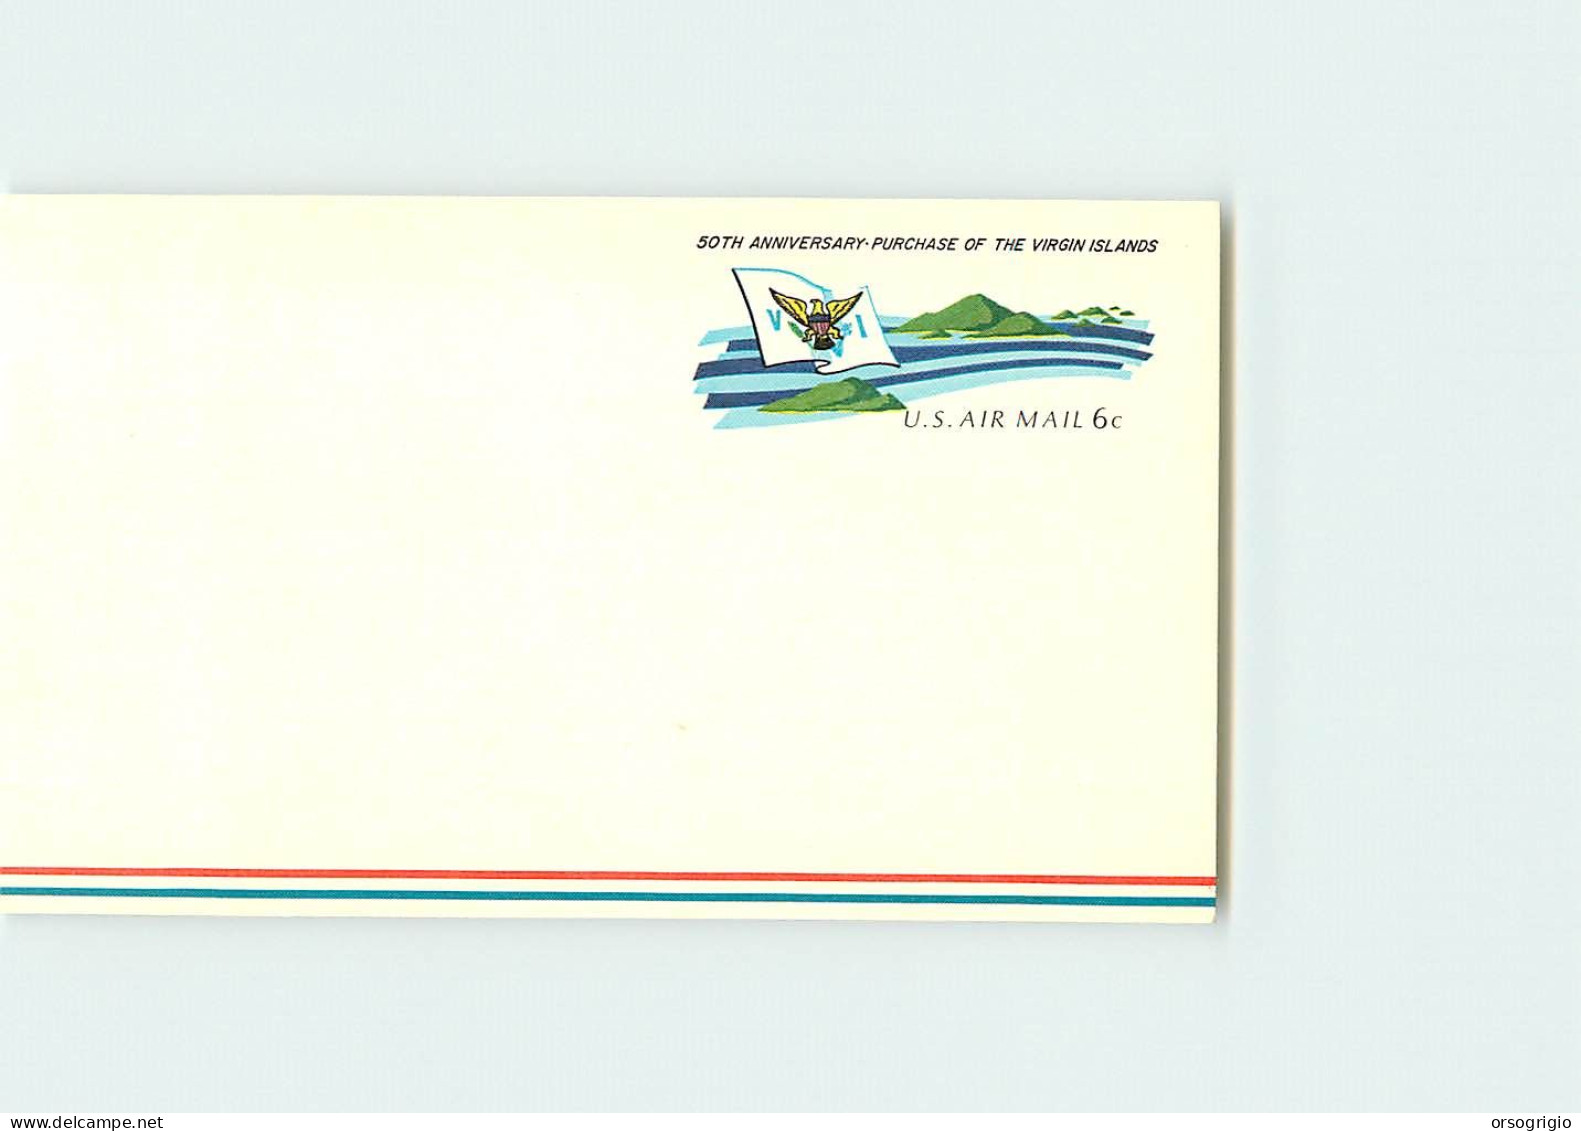 USA - Intero Postale - Stationery - AIR MAIL 6 Cents - VIRGIN ISLANDS - 1961-80